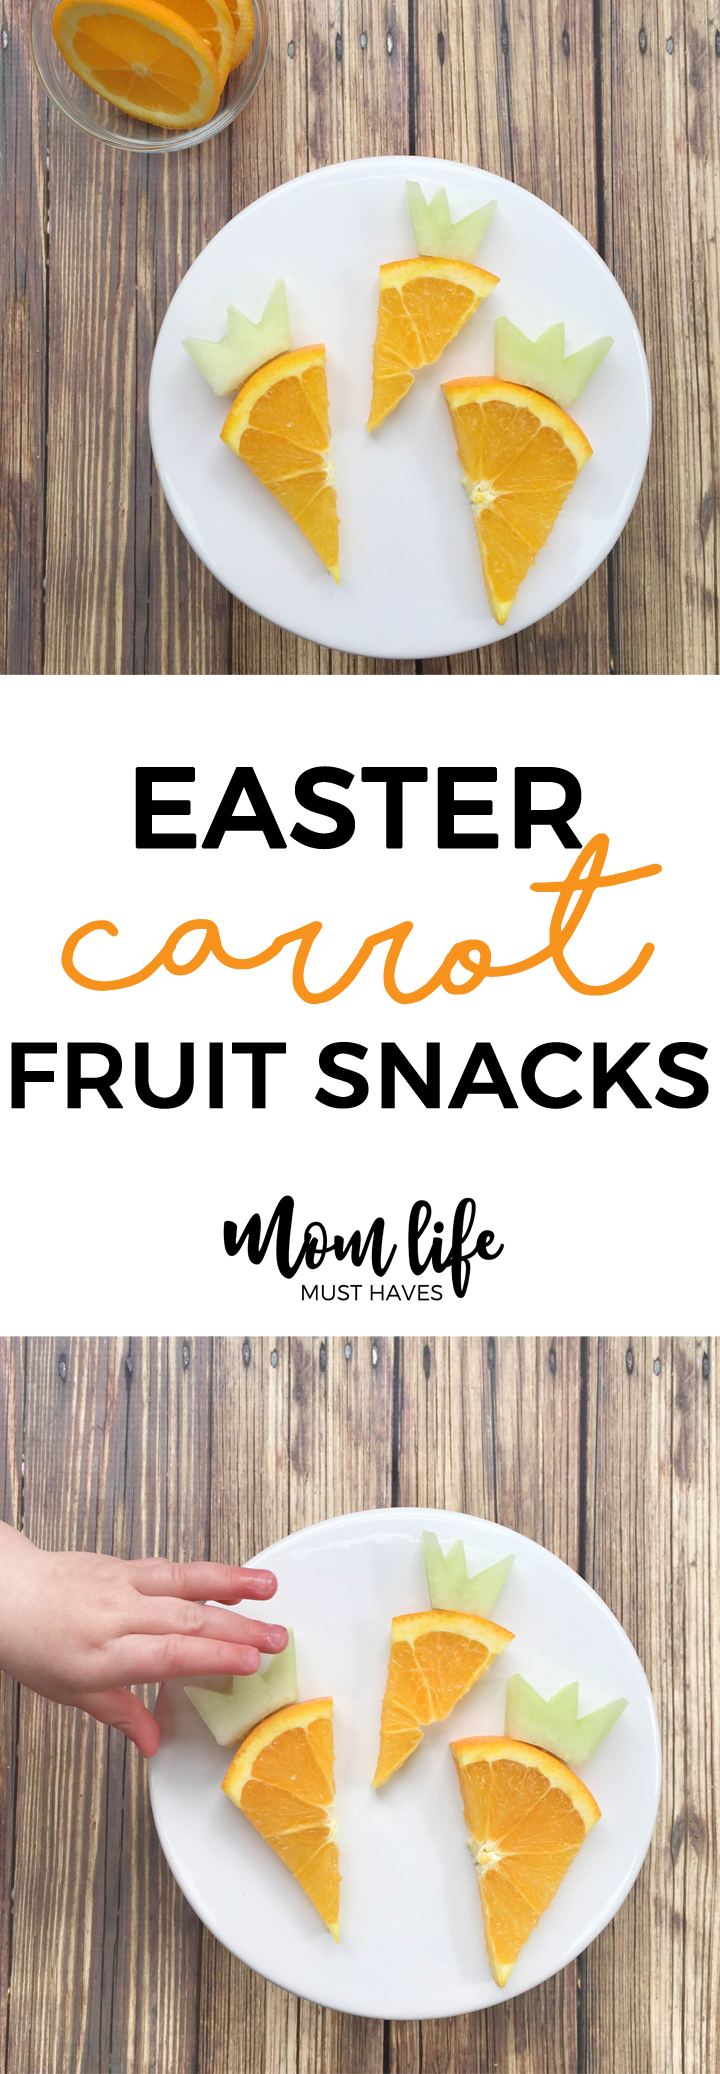 Easter Carrot Fruit Snacks @ Mom Life Must Haves - candy free Easter treats!